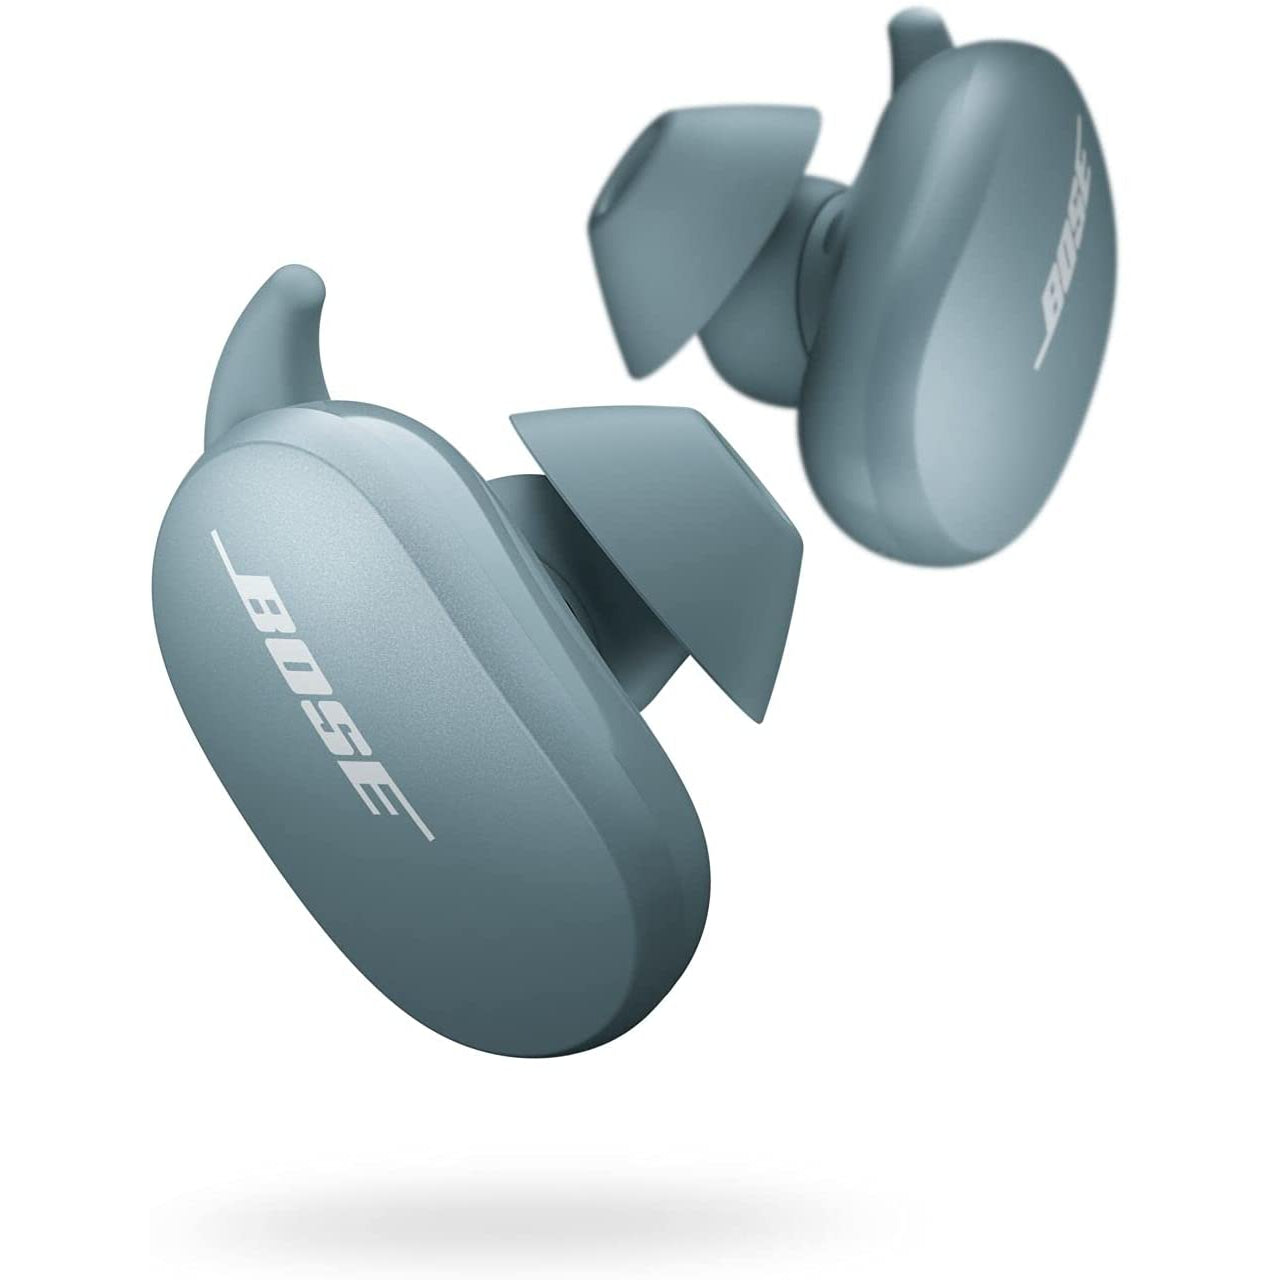 Bose QuietComfort Wireless Bluetooth Noise-Cancelling Earbuds - Stone Blue - Refurbished Excellent